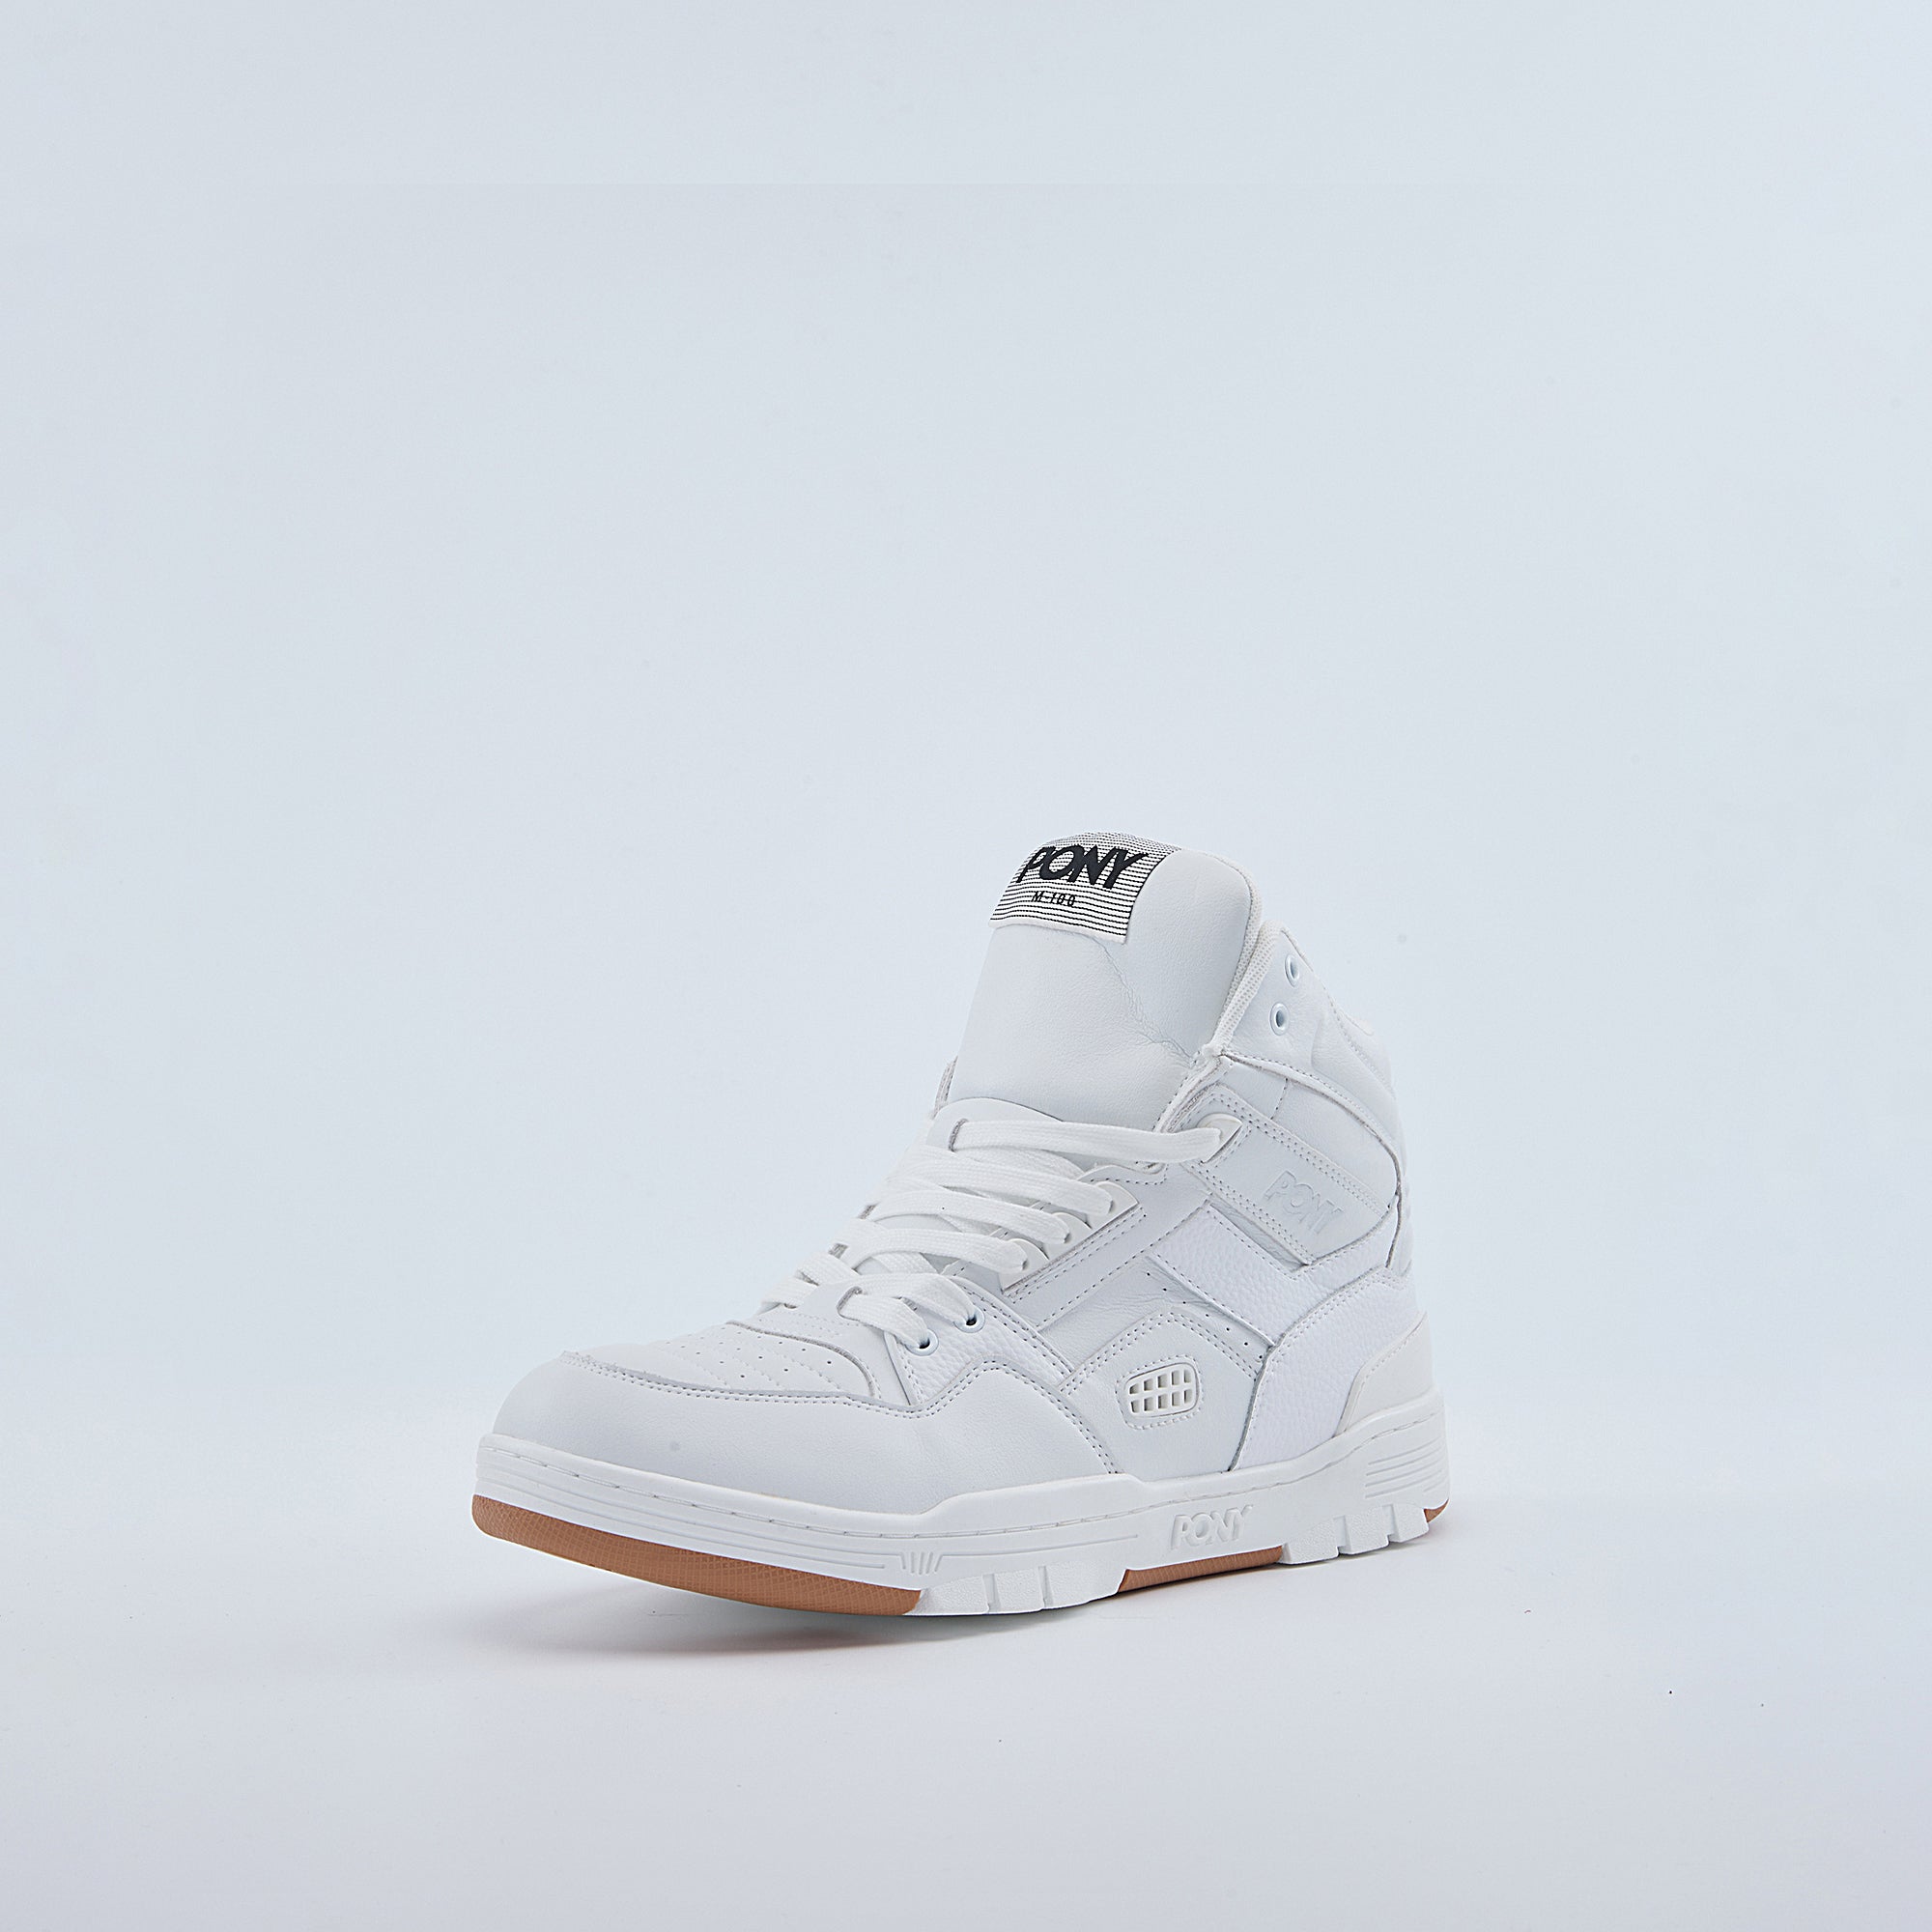 Pony Men's M 100 High Sneakers with White Lace White Gum